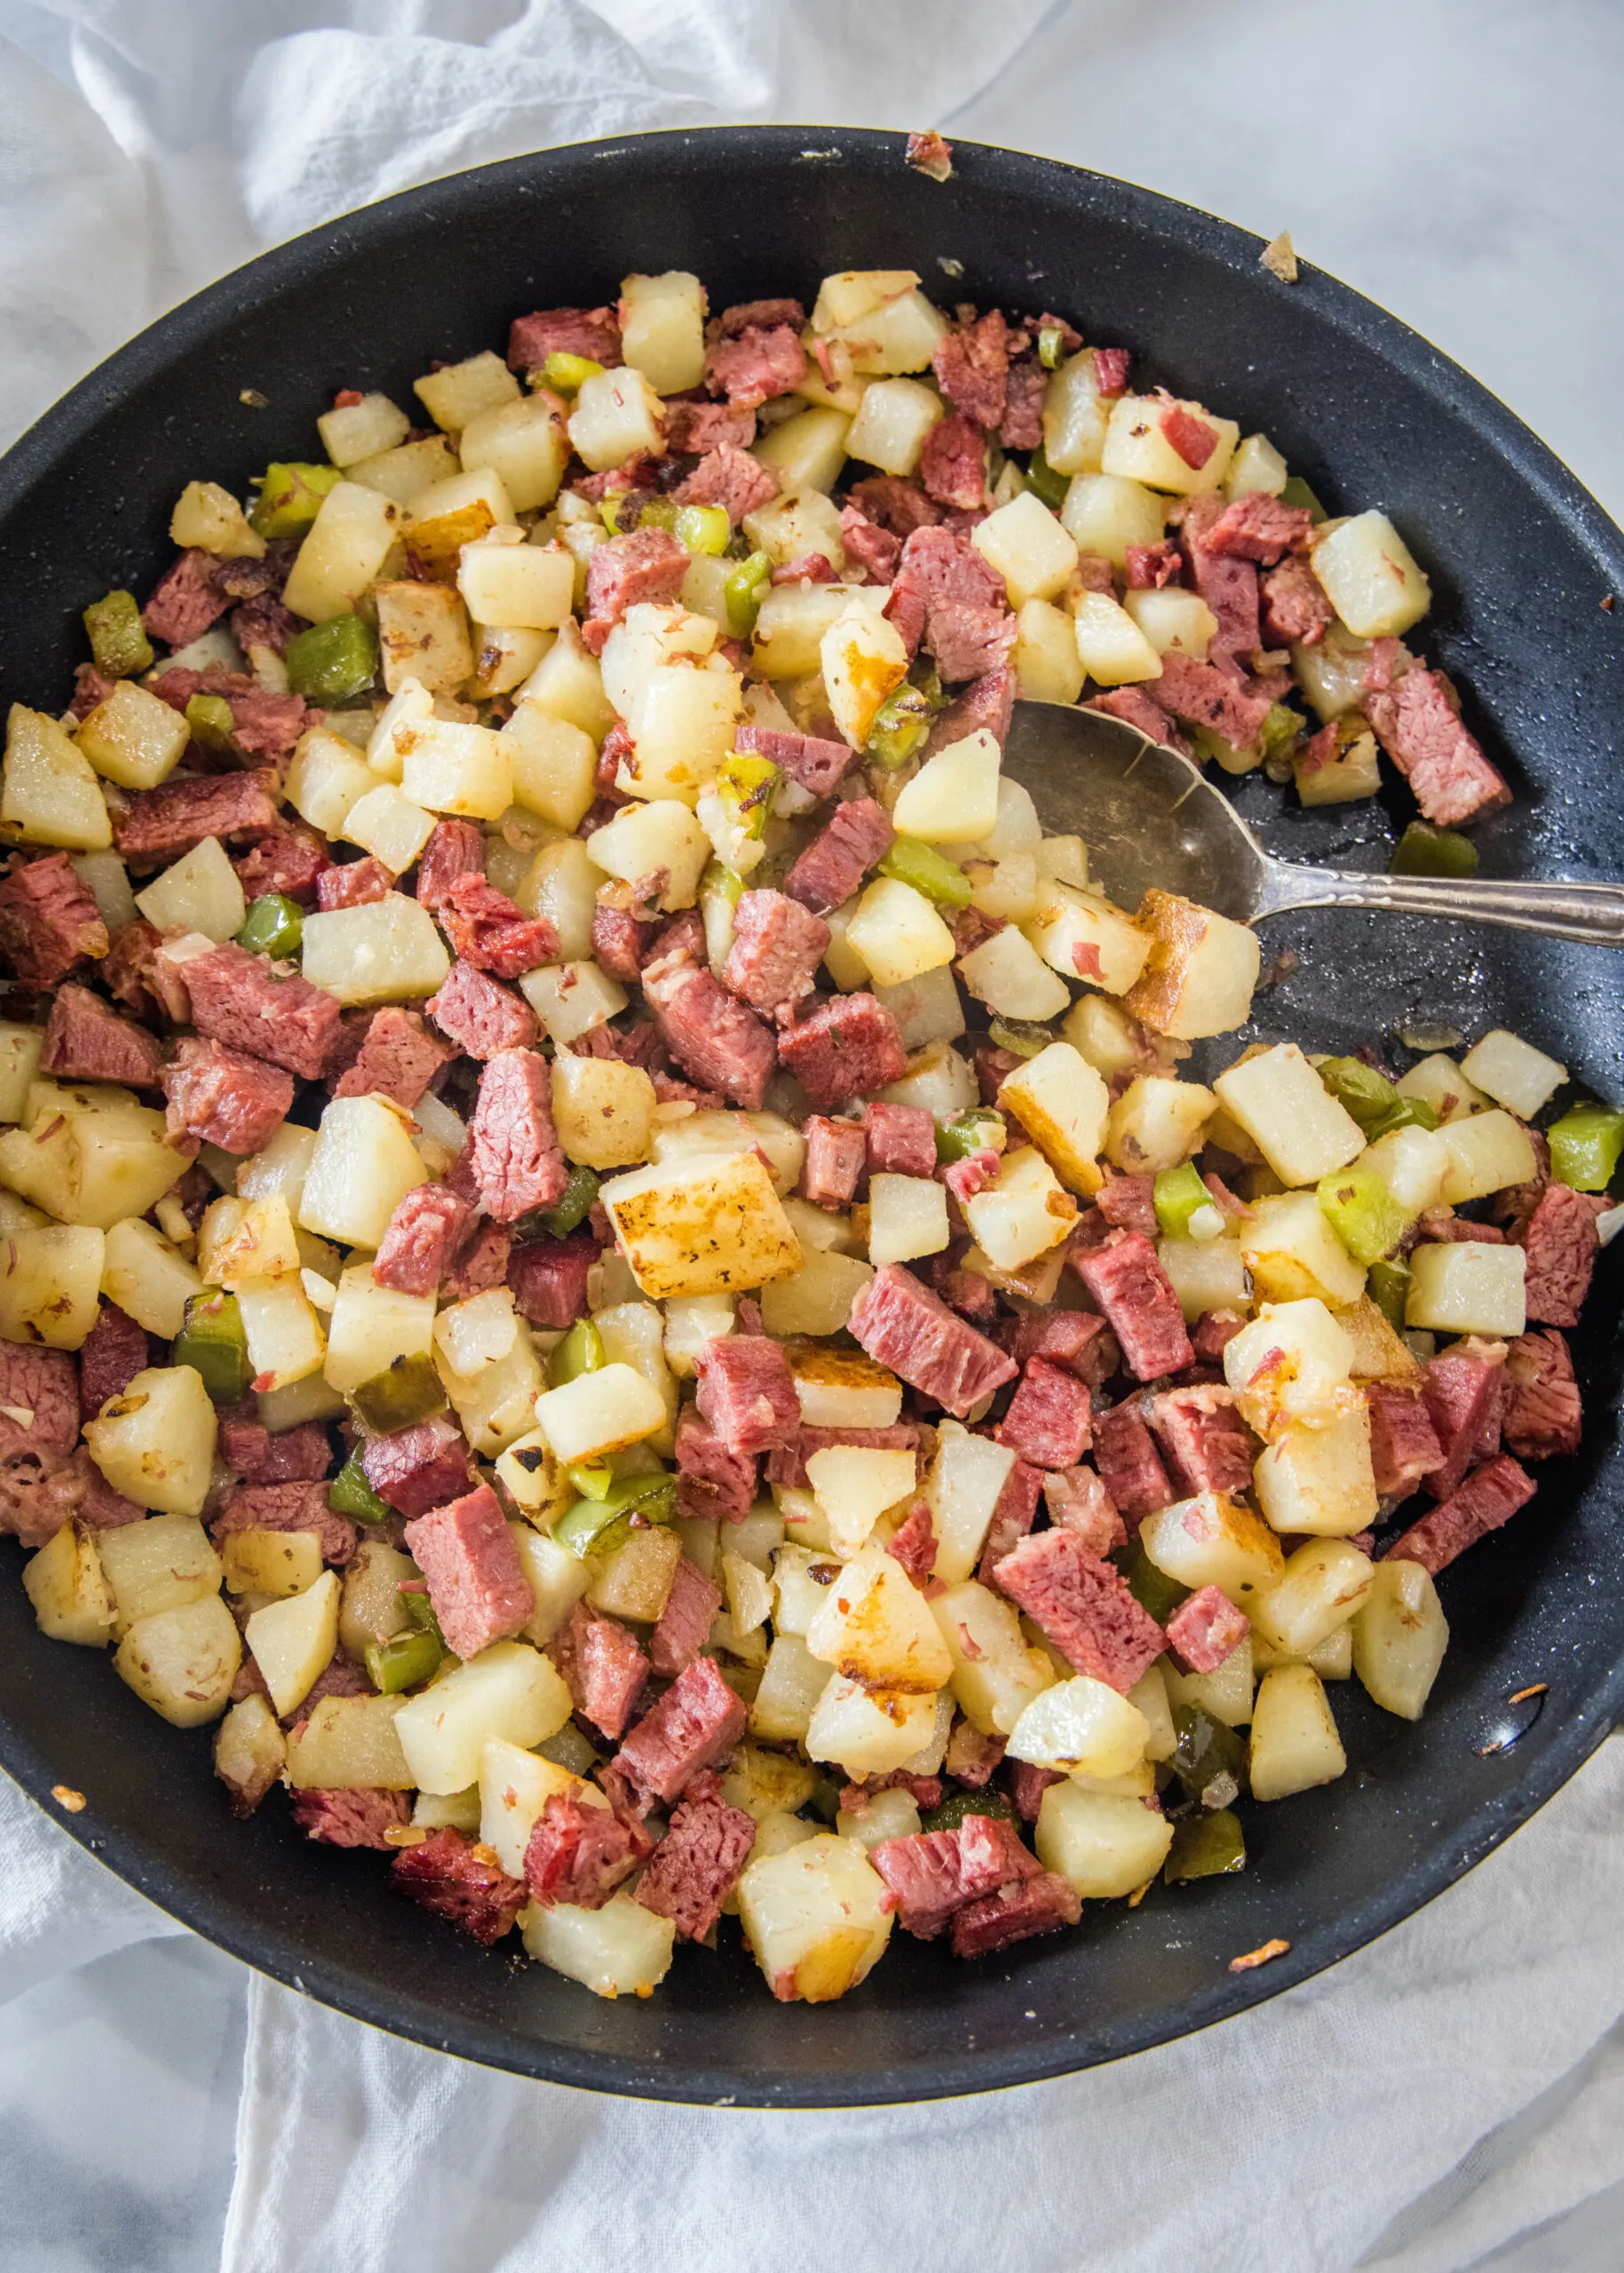 Overhead view of corned beef hash in a large skillet with a serving spoon.